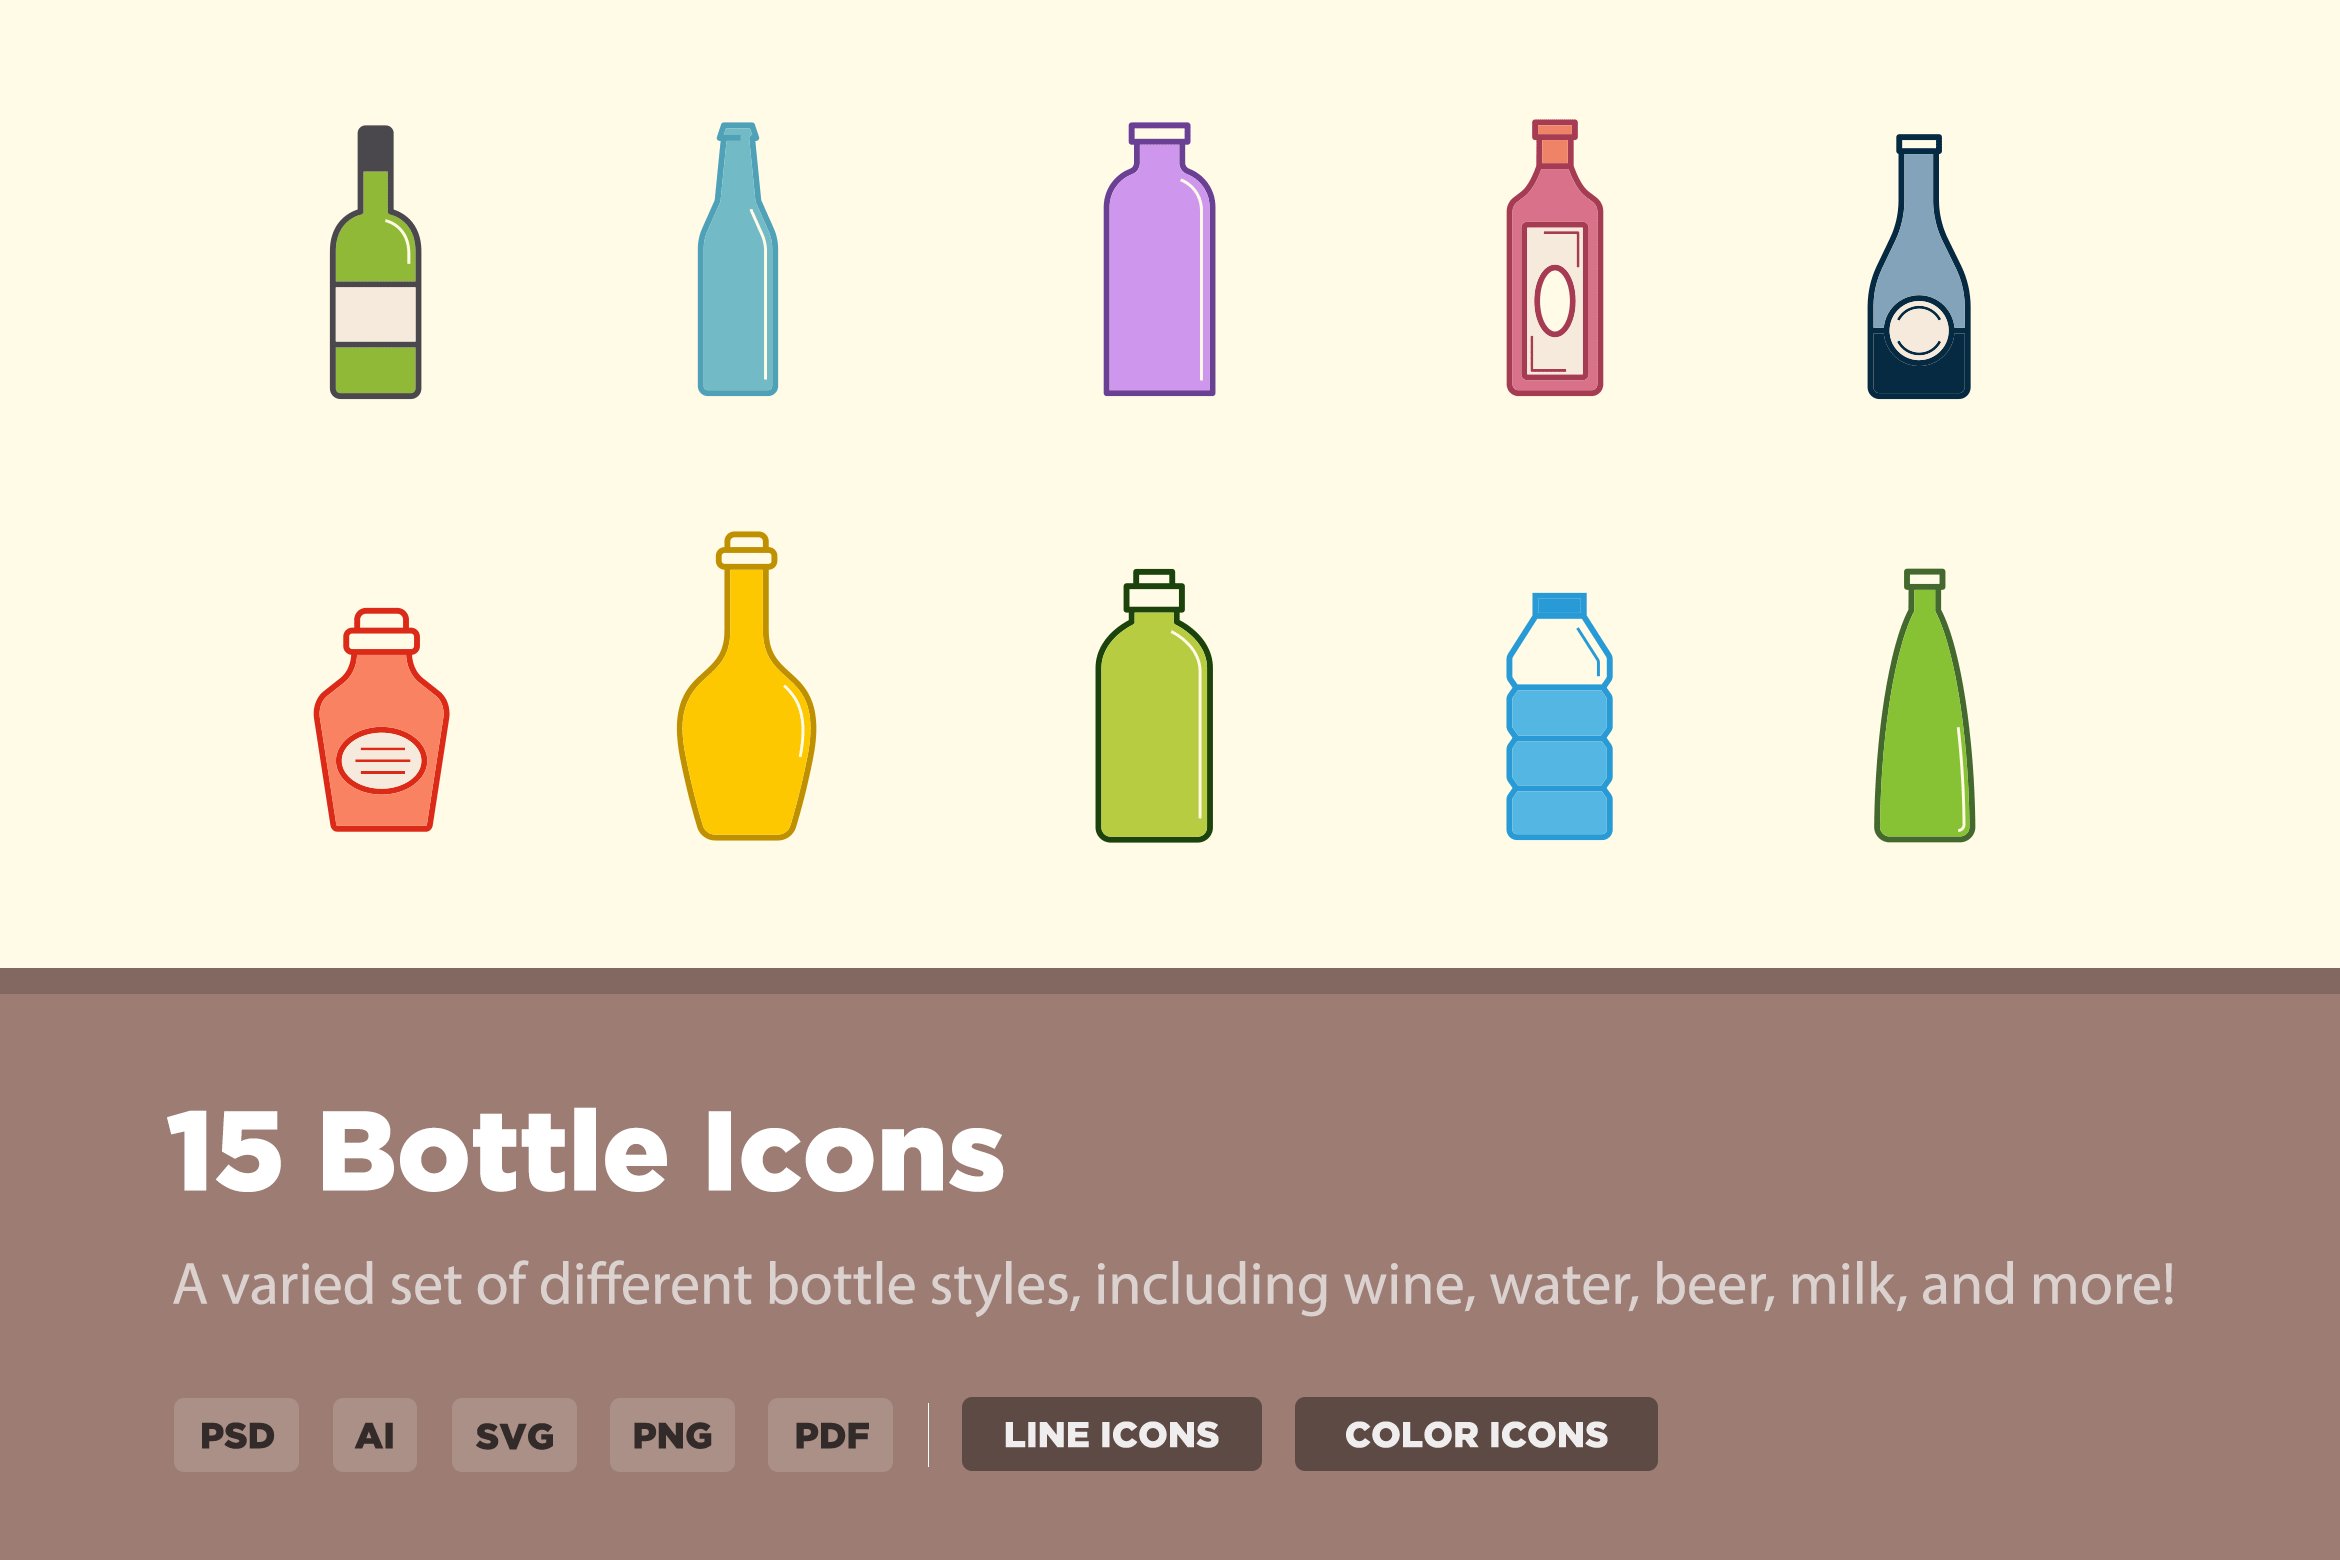 15 Bottle Icons cover image.